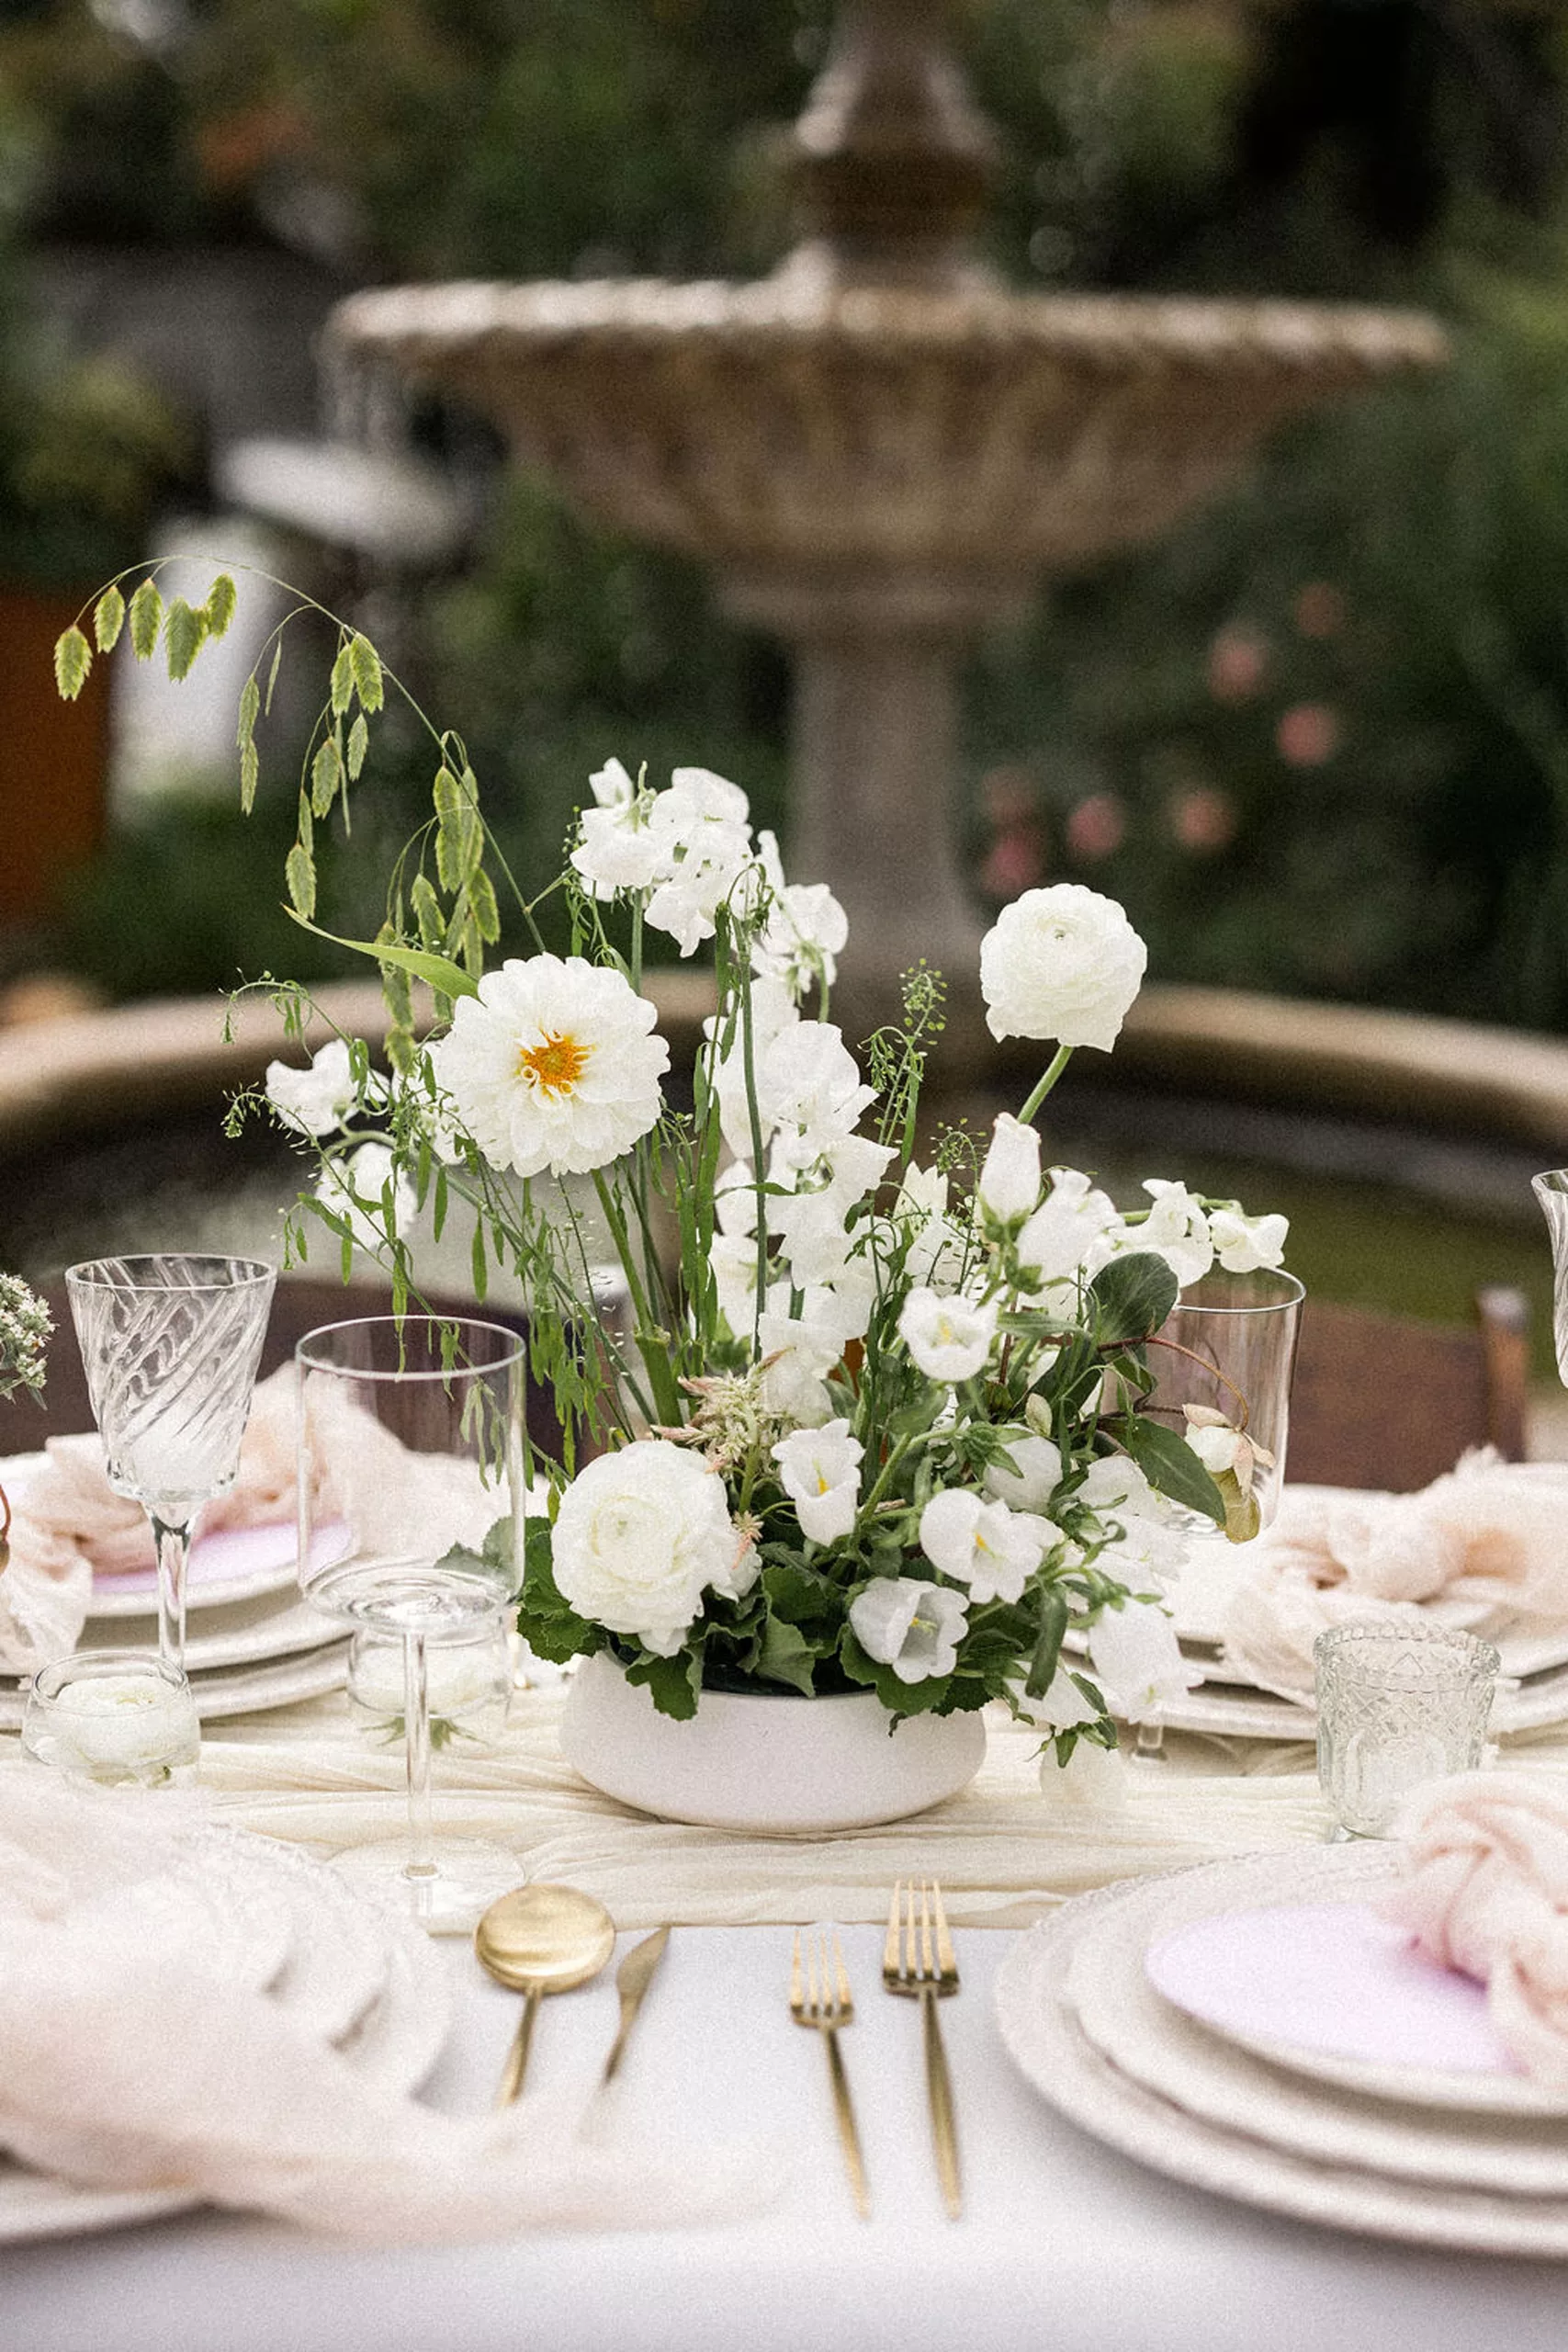 Details of an outdoor wedding reception table set up with pink linen and gold silverware next to a fountain at lillian gardens wedding venue